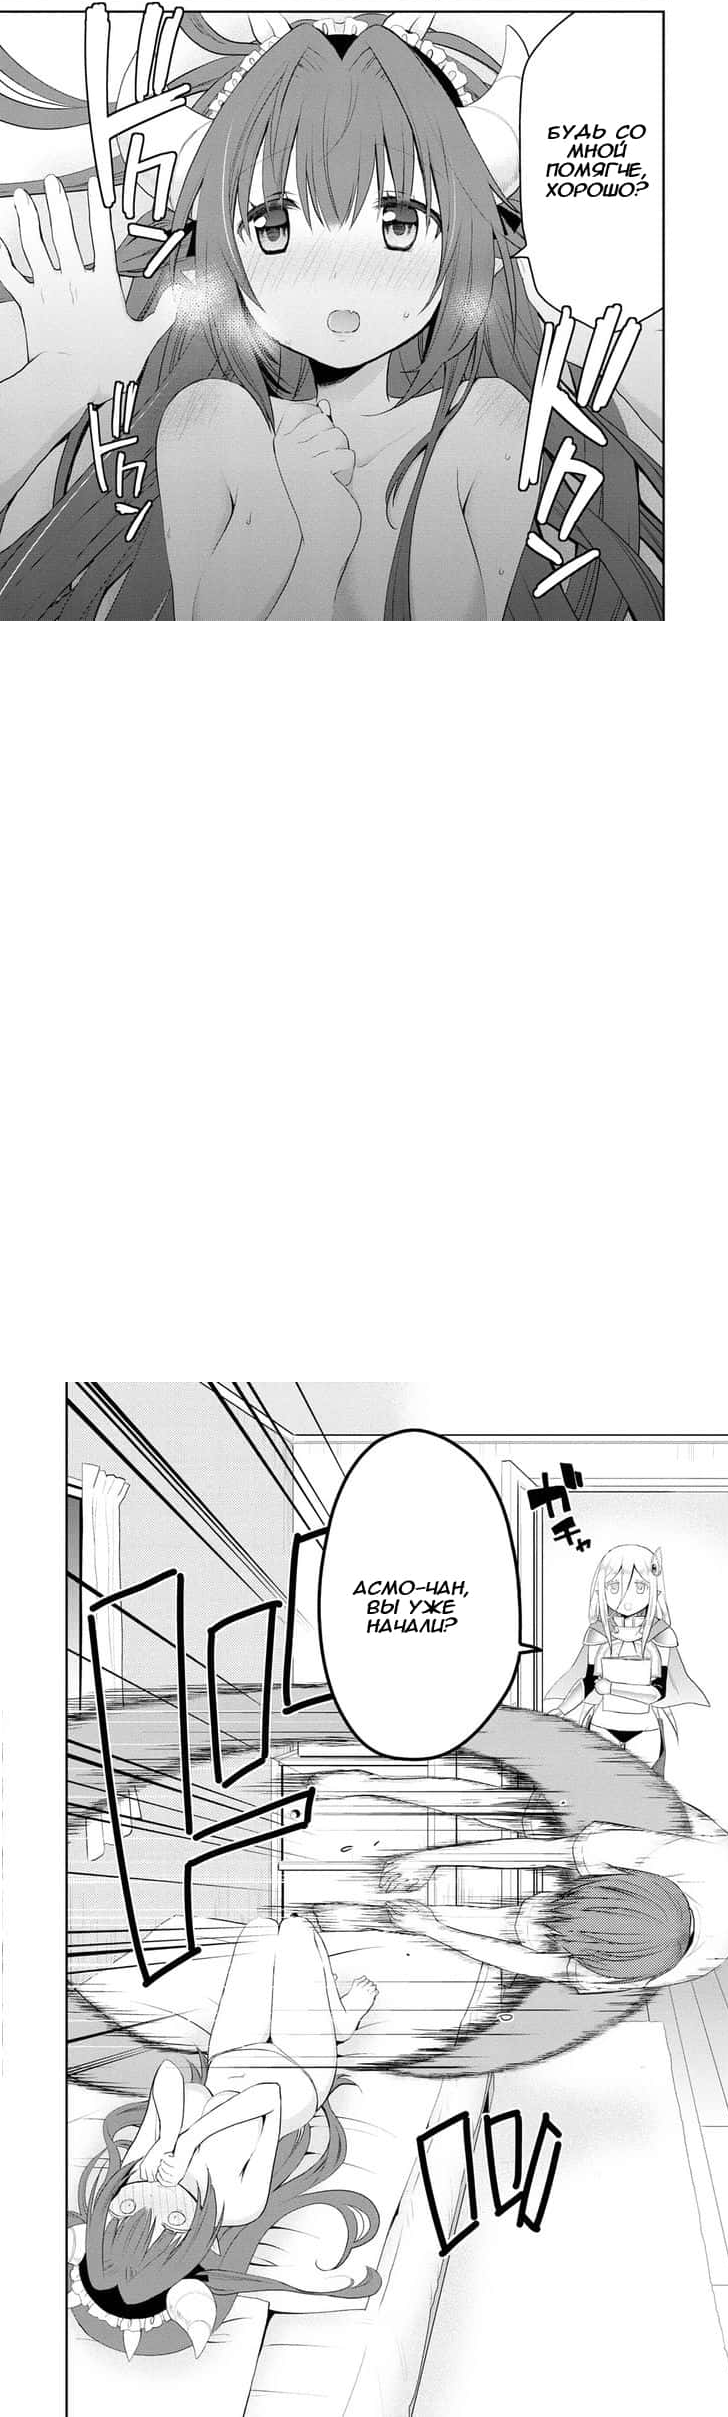 A couple of funny fragments from manga (part 27) - NSFW, Anime, Comedy, Manga, Manhwa, Battle, Exhibitionism, Sex, Embarrassment, Longpost